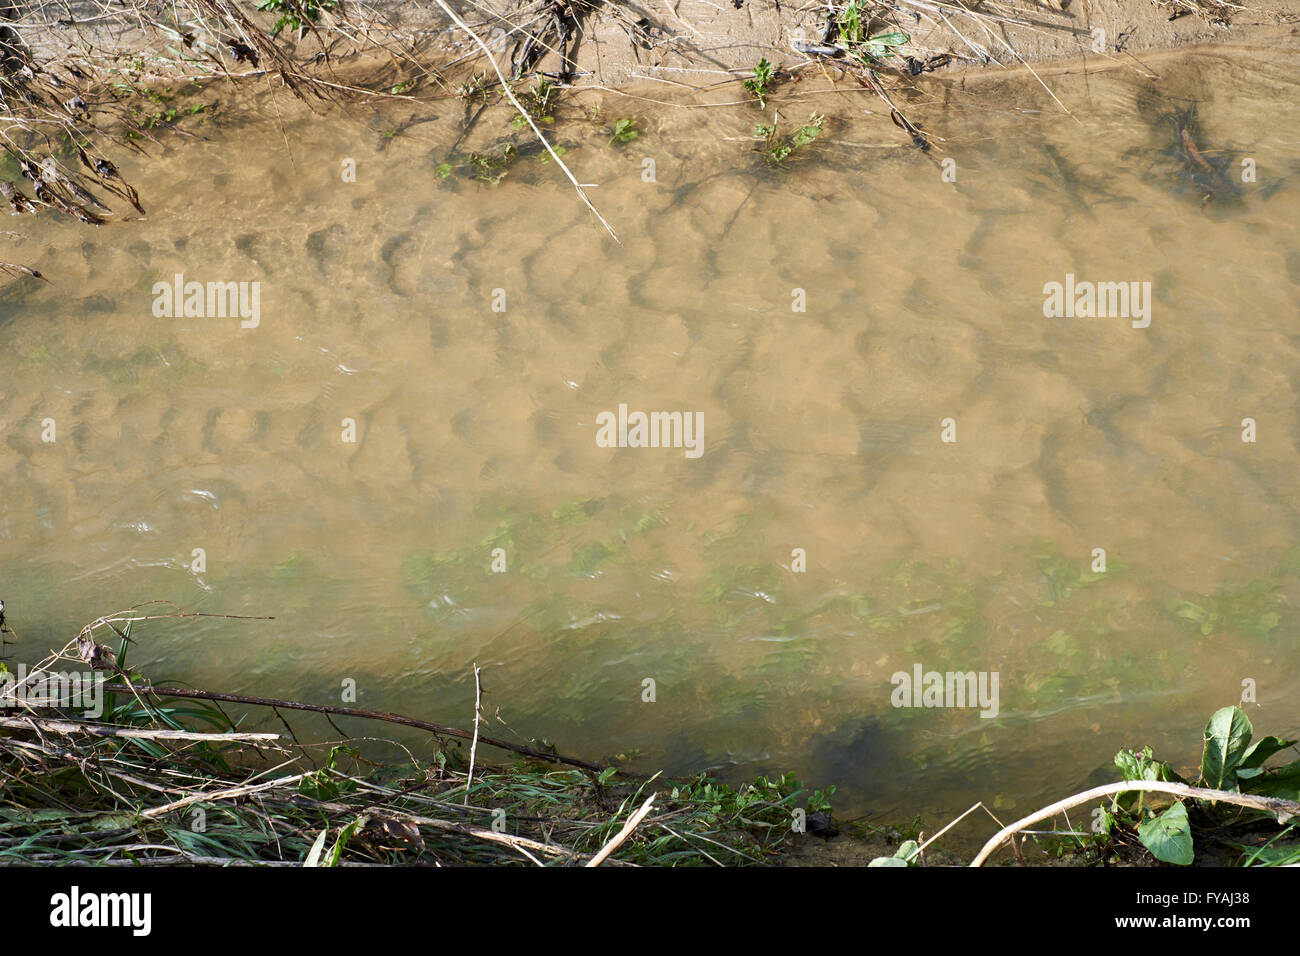 Ripple bedforms formed in streambed silty sediment as a result of increased water velocity during a period of flooding. Stock Photo